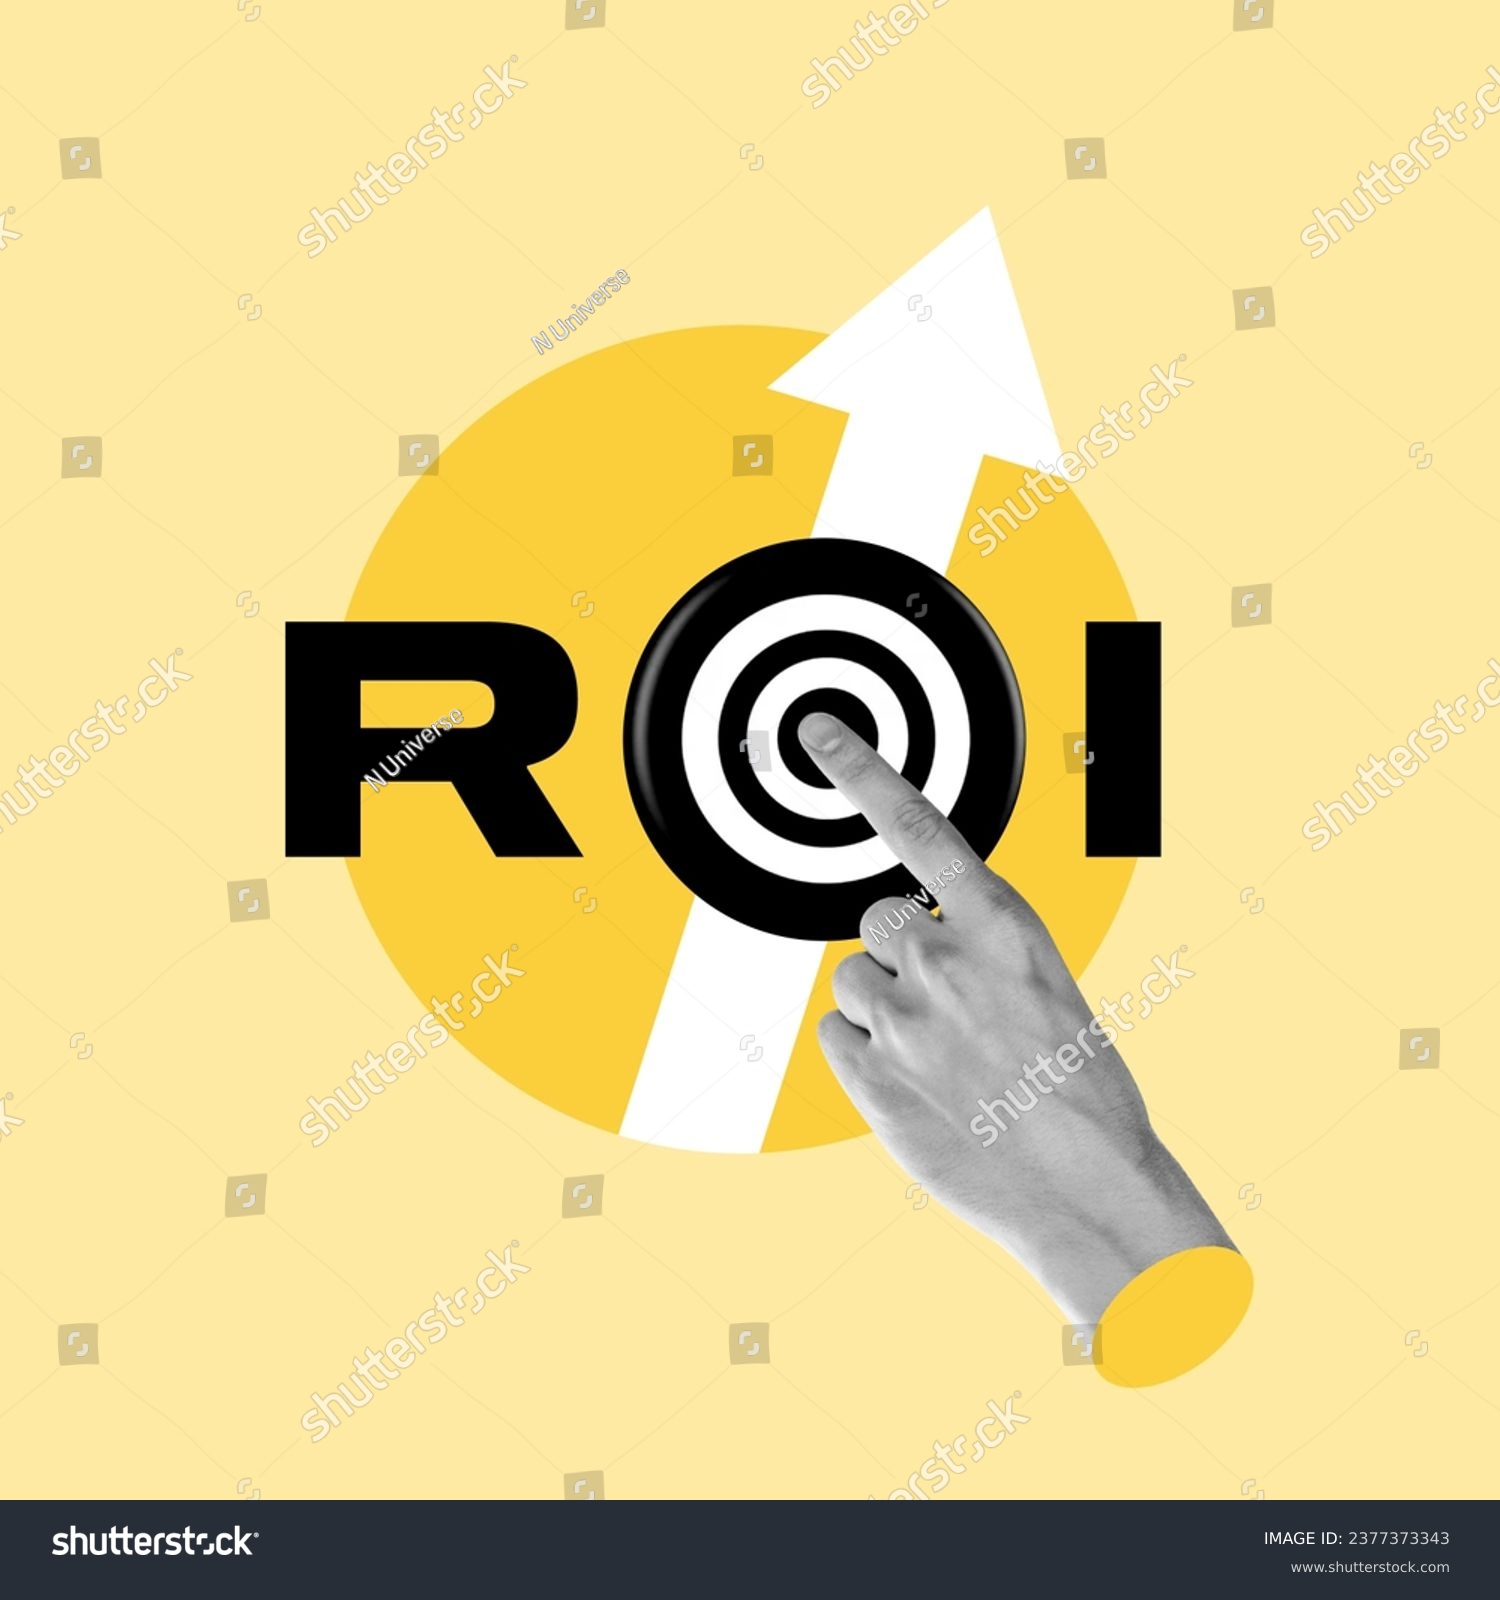 ROI Concept, Return on Investment, Business Marketing ROI, Return on Investment, Adult, Savings, Analyzing, Financial Advisor, Turnover, Connection, Accounting, Growth, Cultivated, Data, Stock Market  #2377373343